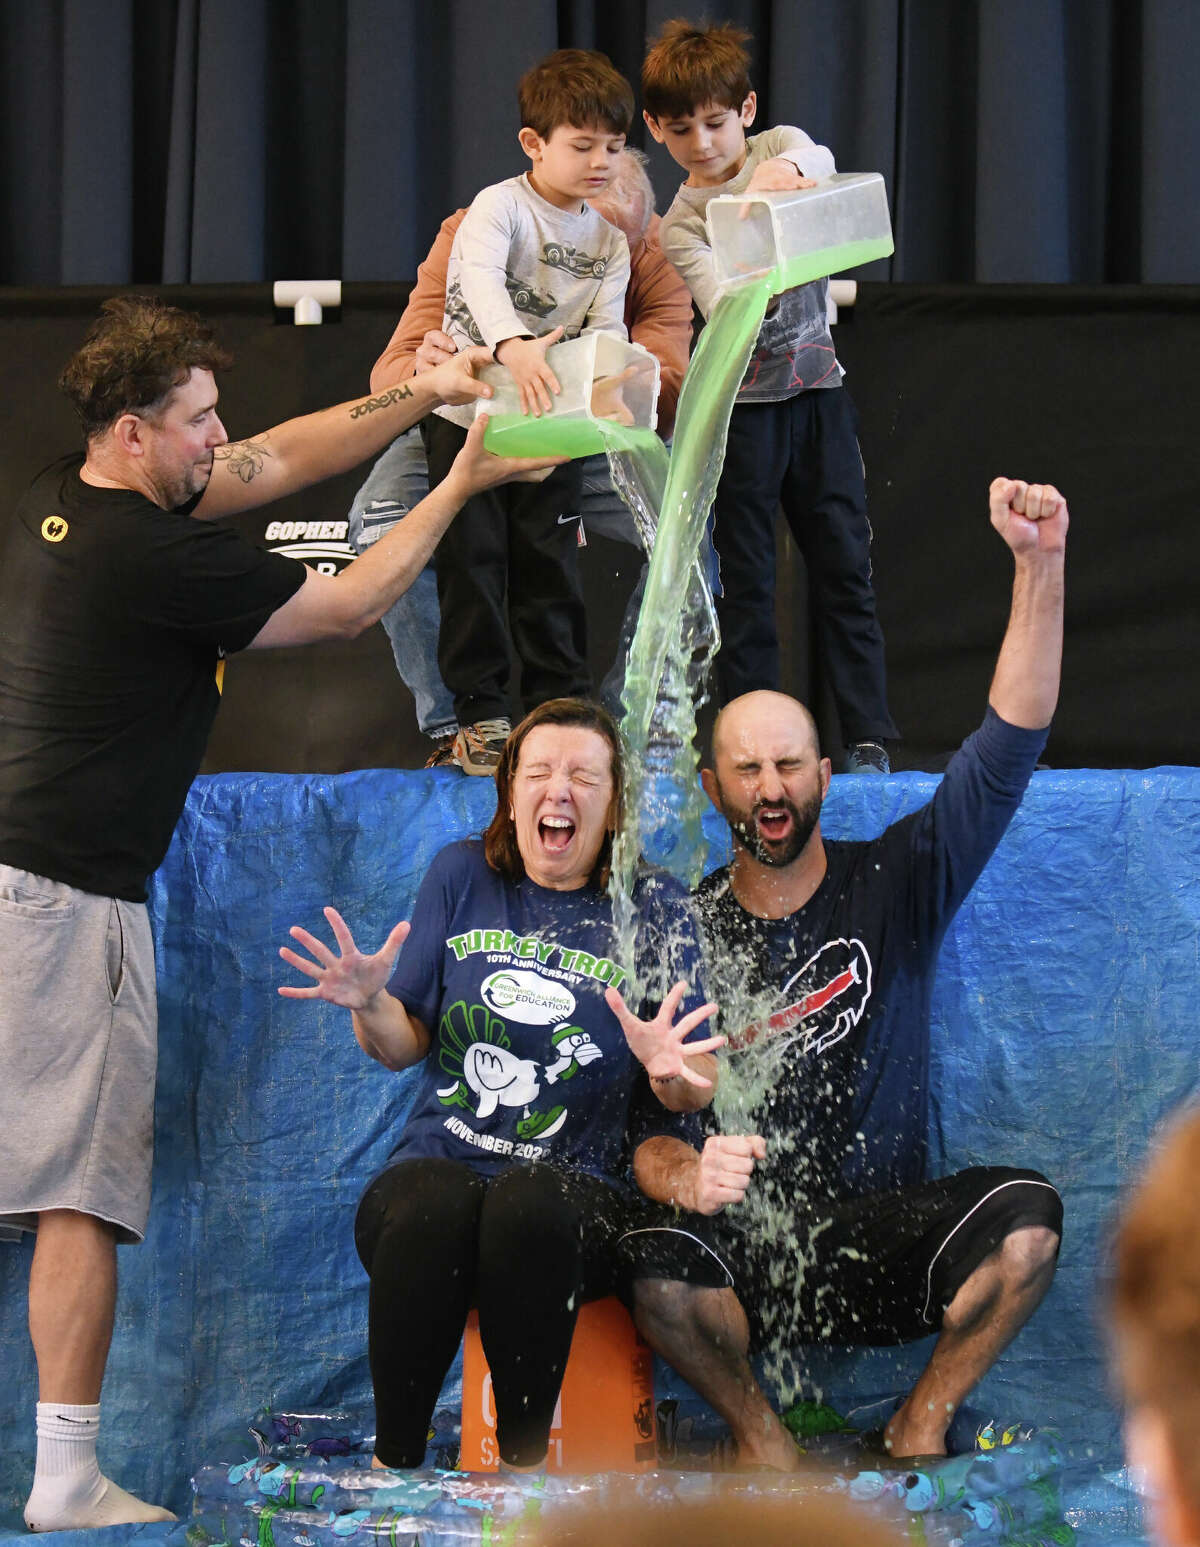 Principal Kathleen Ramirez and physical education teacher Dan Taylor get slimed by fellow gym teacher Pat Prisinzano, left, and students Sam and Hugo Kantor during the Neighbor to Neighbor food drive celebration at North Mianus School in the Riverside section of Greenwich, Conn. Wednesday, Nov. 23, 2022. North Mianus students and faculty donated thousands of pounds of food to local food pantry Neighbor to Neighbor. To celebrate, students played in a cornhole championship match and "slimed" their teachers.